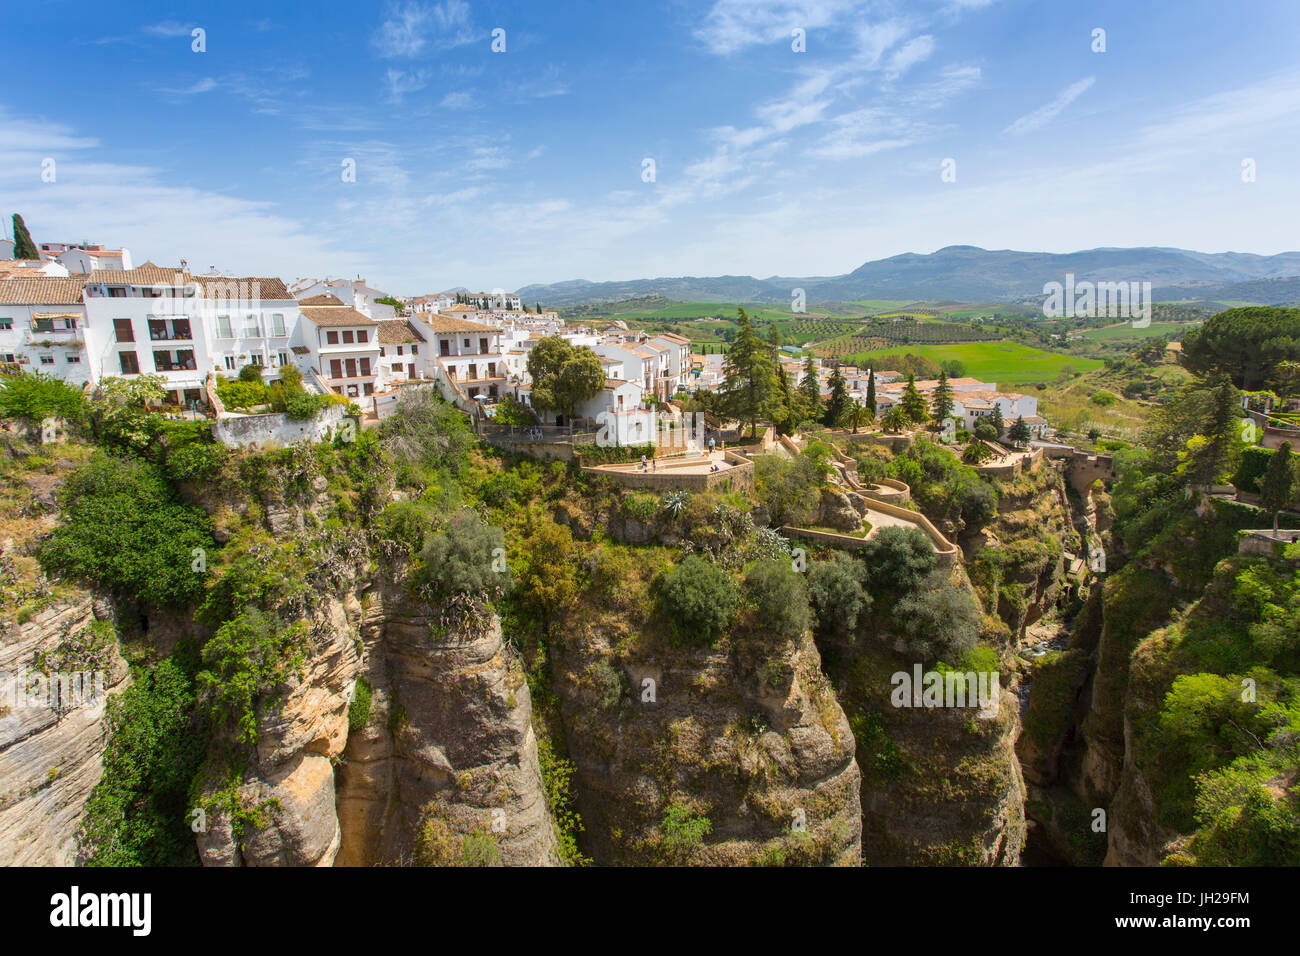 View of Ronda and Andalusian countryside from Puente Nuevo, Ronda, Andalusia, Spain, Europe Stock Photo